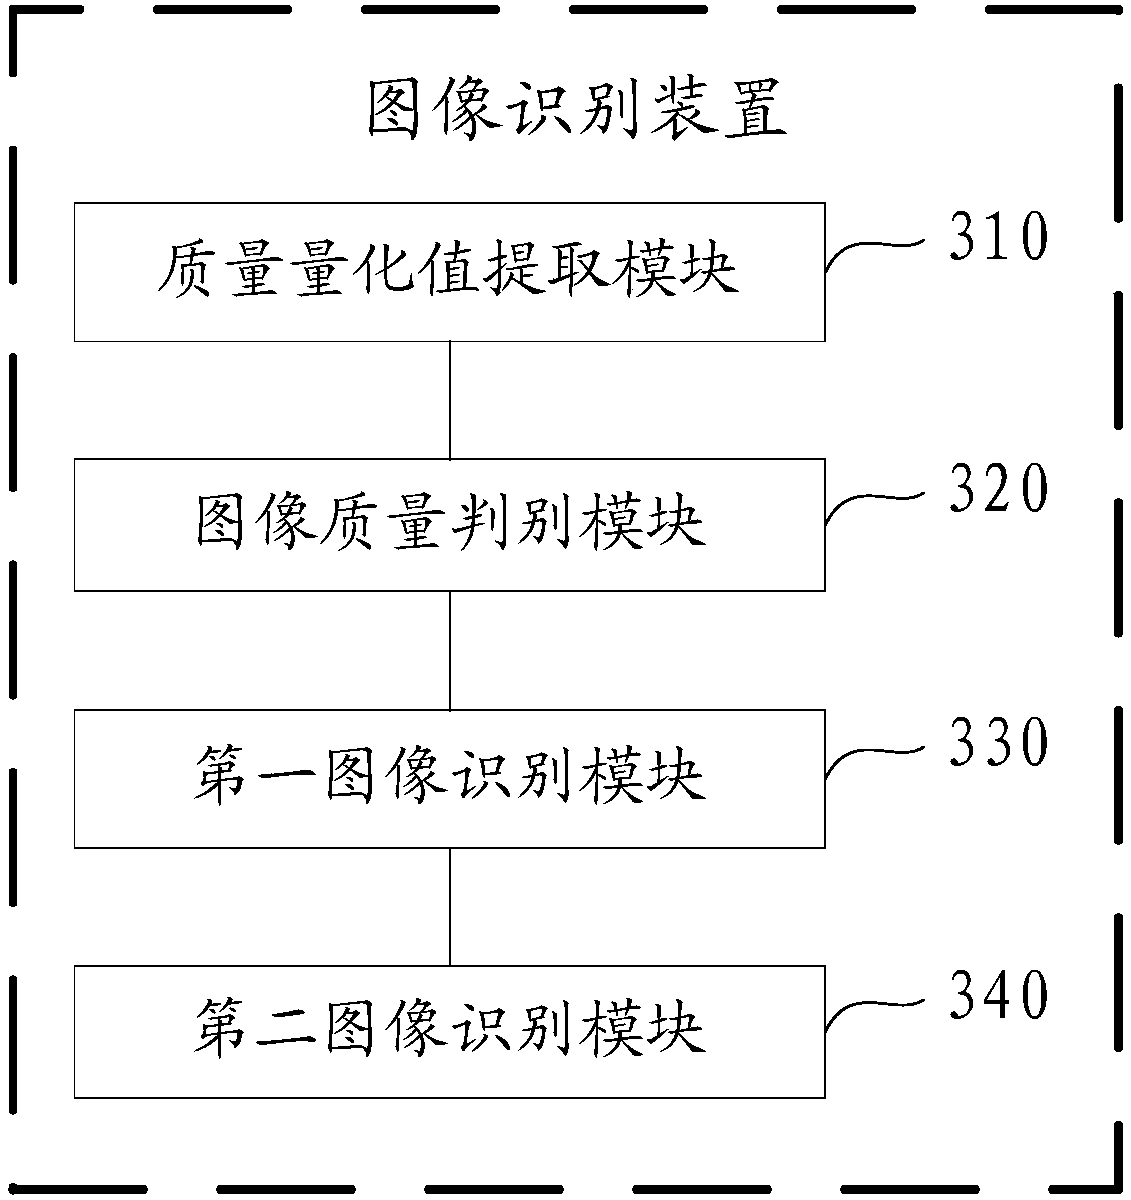 Image recognition method and device based on convolutional neural network